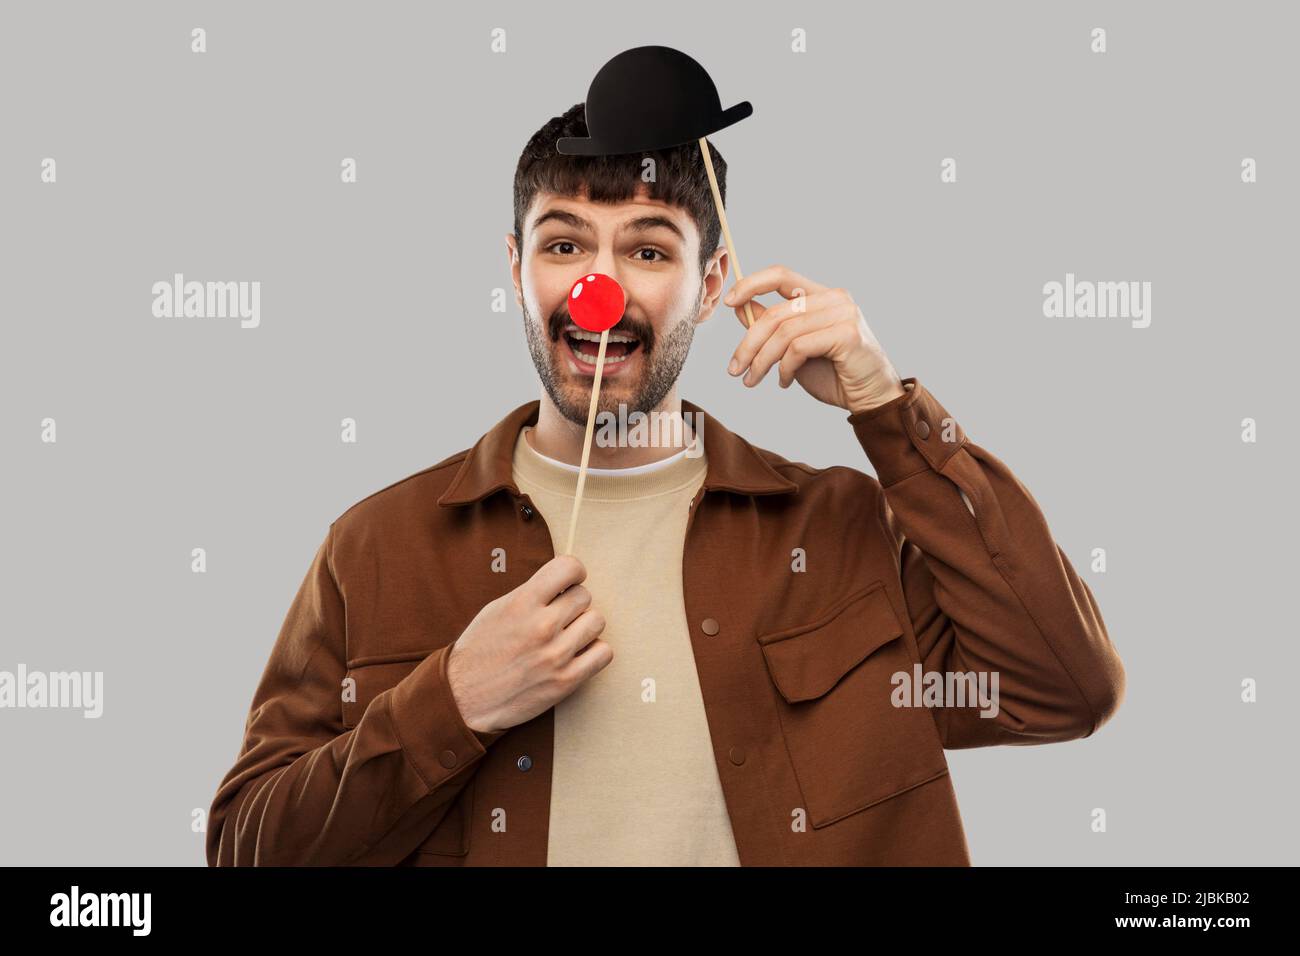 smiling man with bowler hat and red clown nose Stock Photo